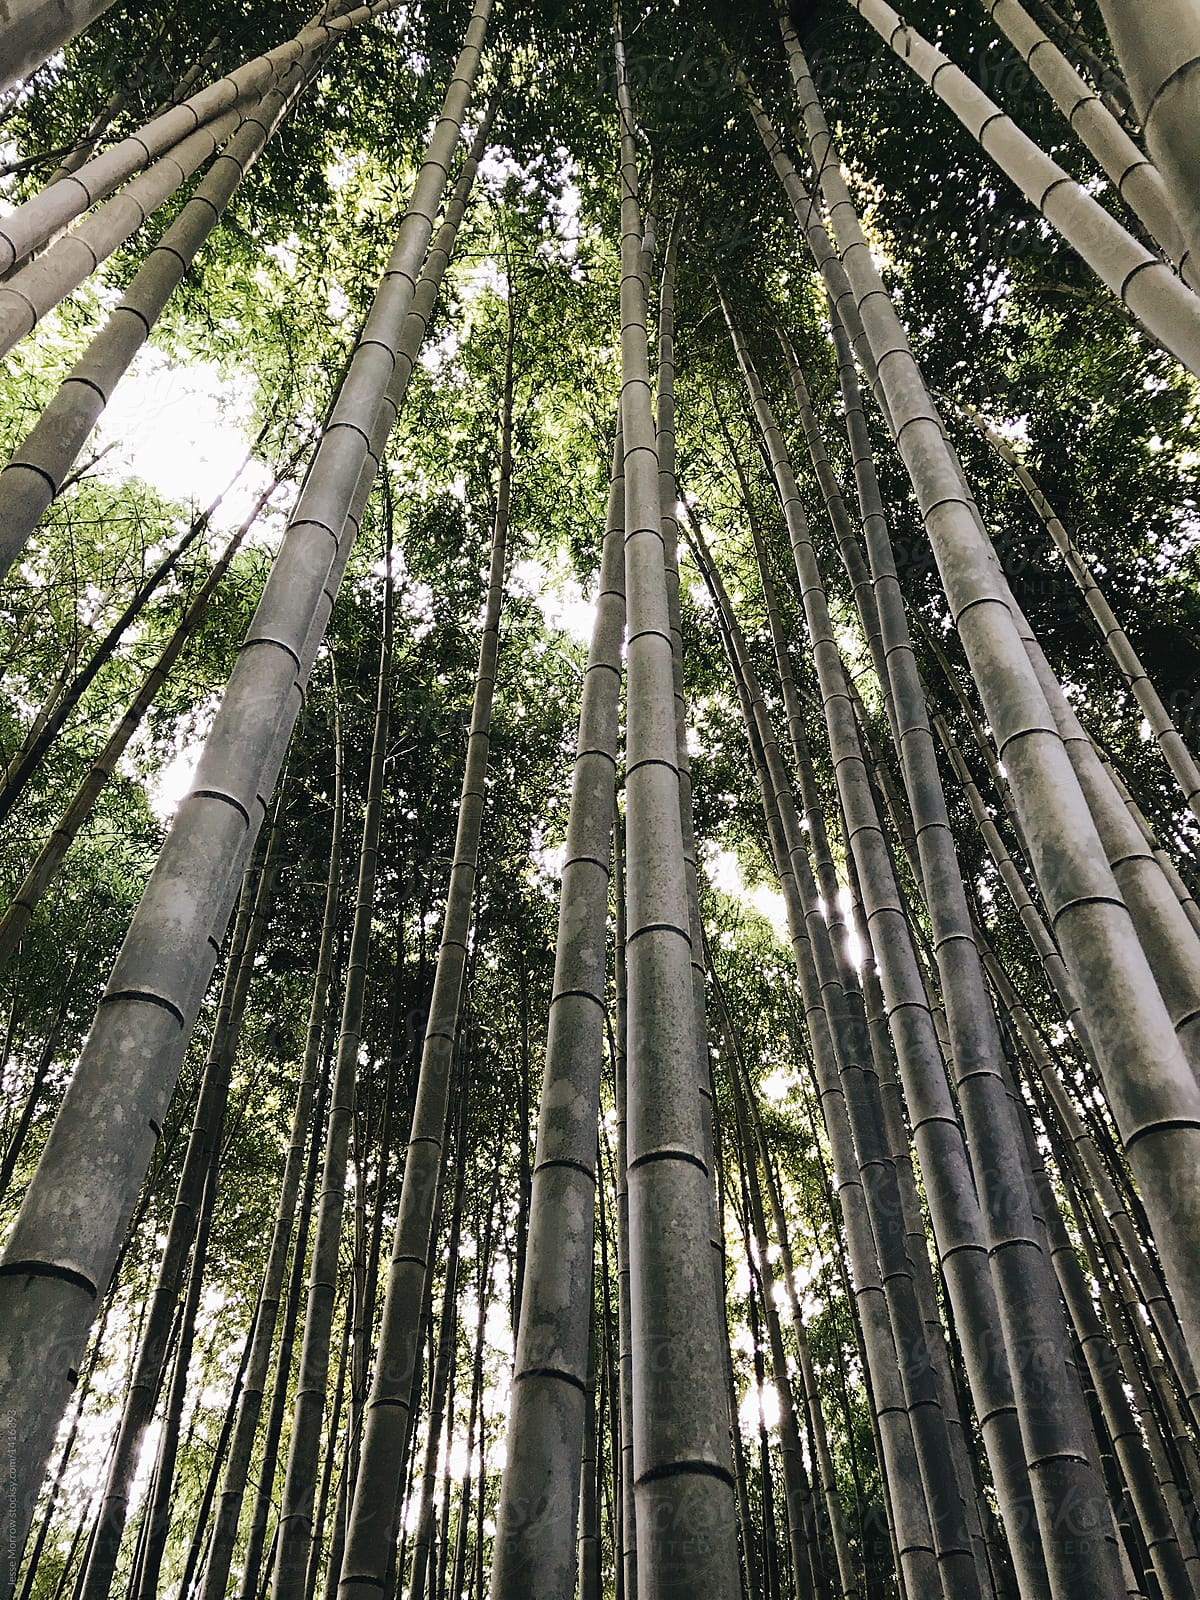 beautiful landscapes through tall old growth bamboo forest in kyoto japan